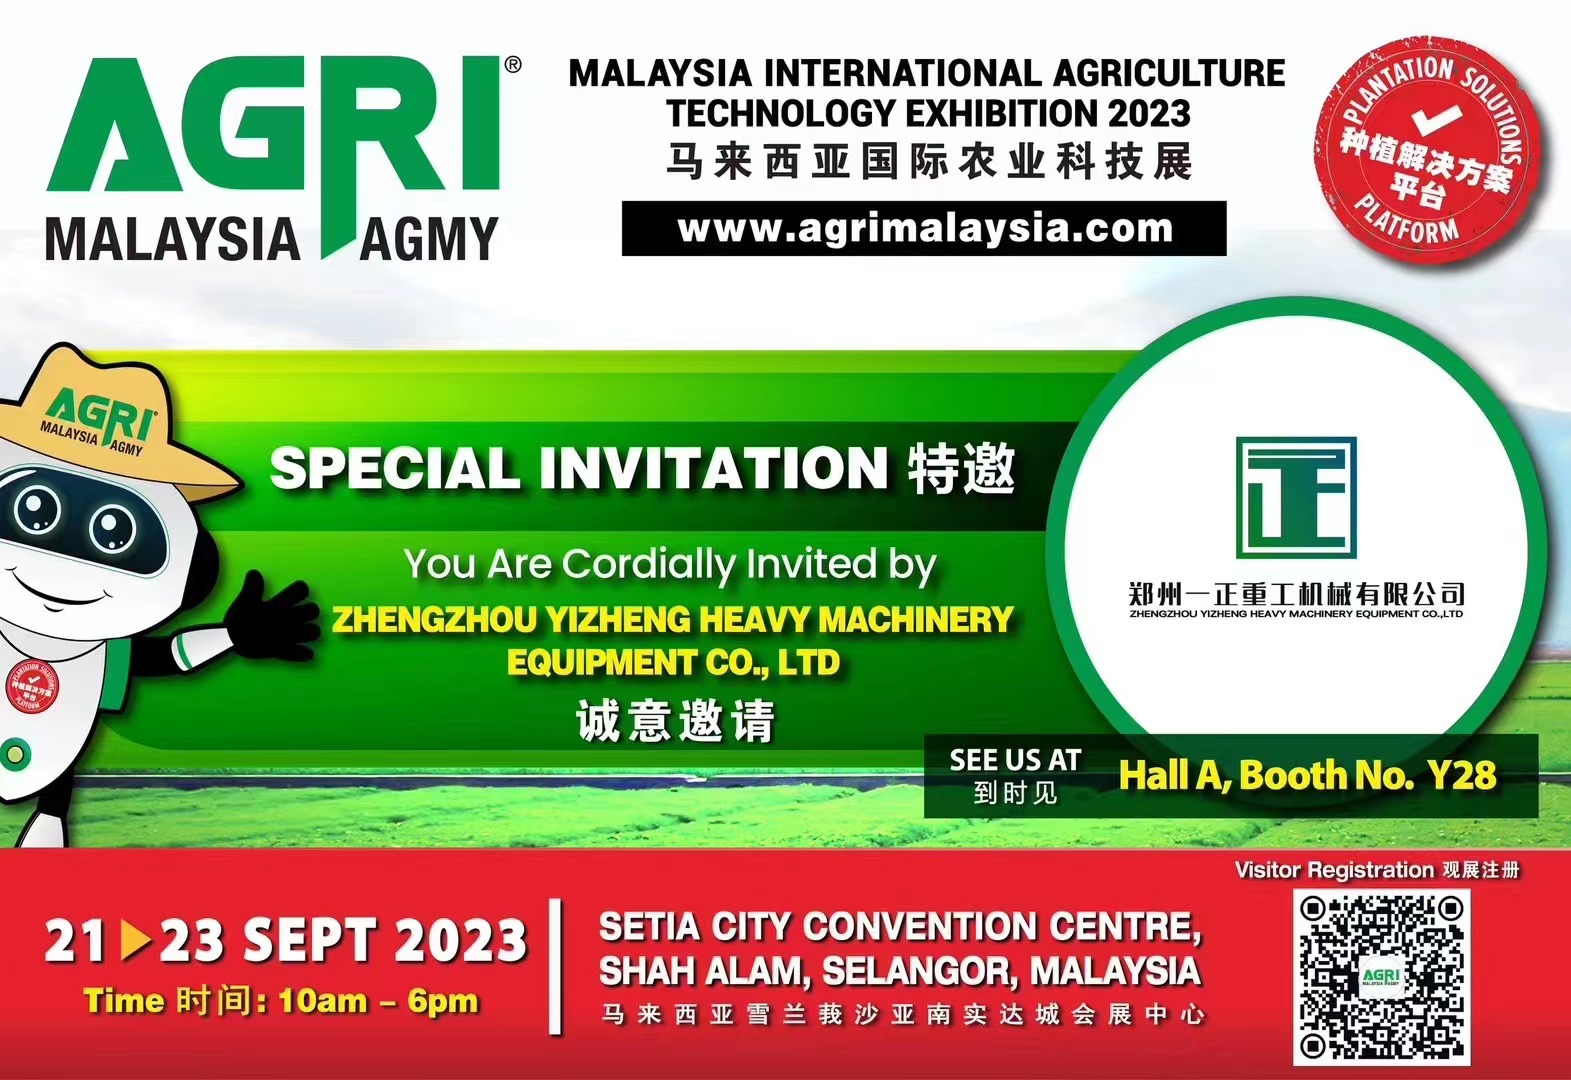 MALAYSIA INTERNATIONAL AGRICULTURE TECHNOLOGY EXHIBITION 2023